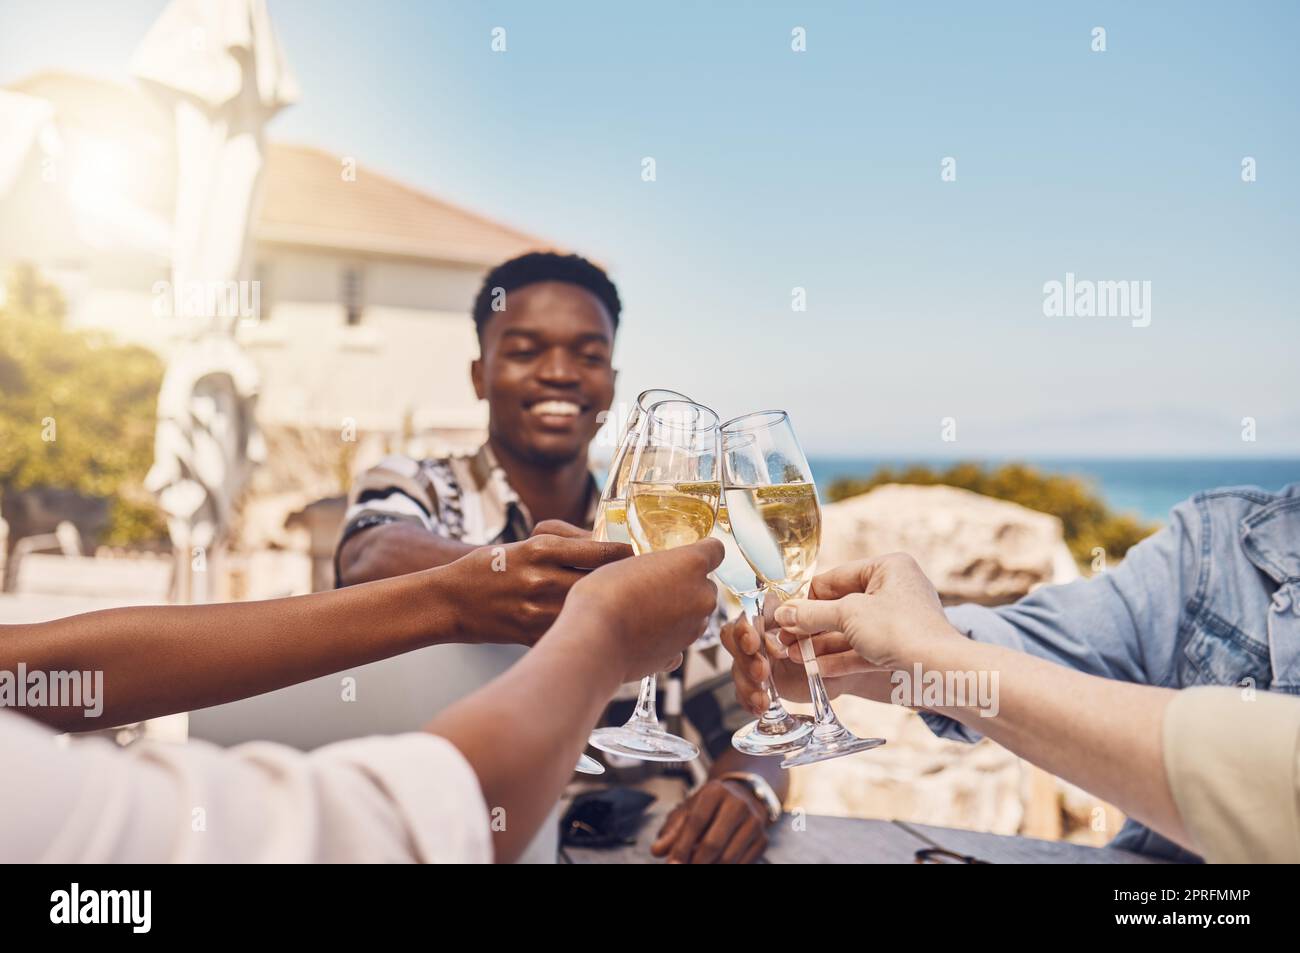 Attractive Diverse Couple On Outdoor Date Stock Photo - Download